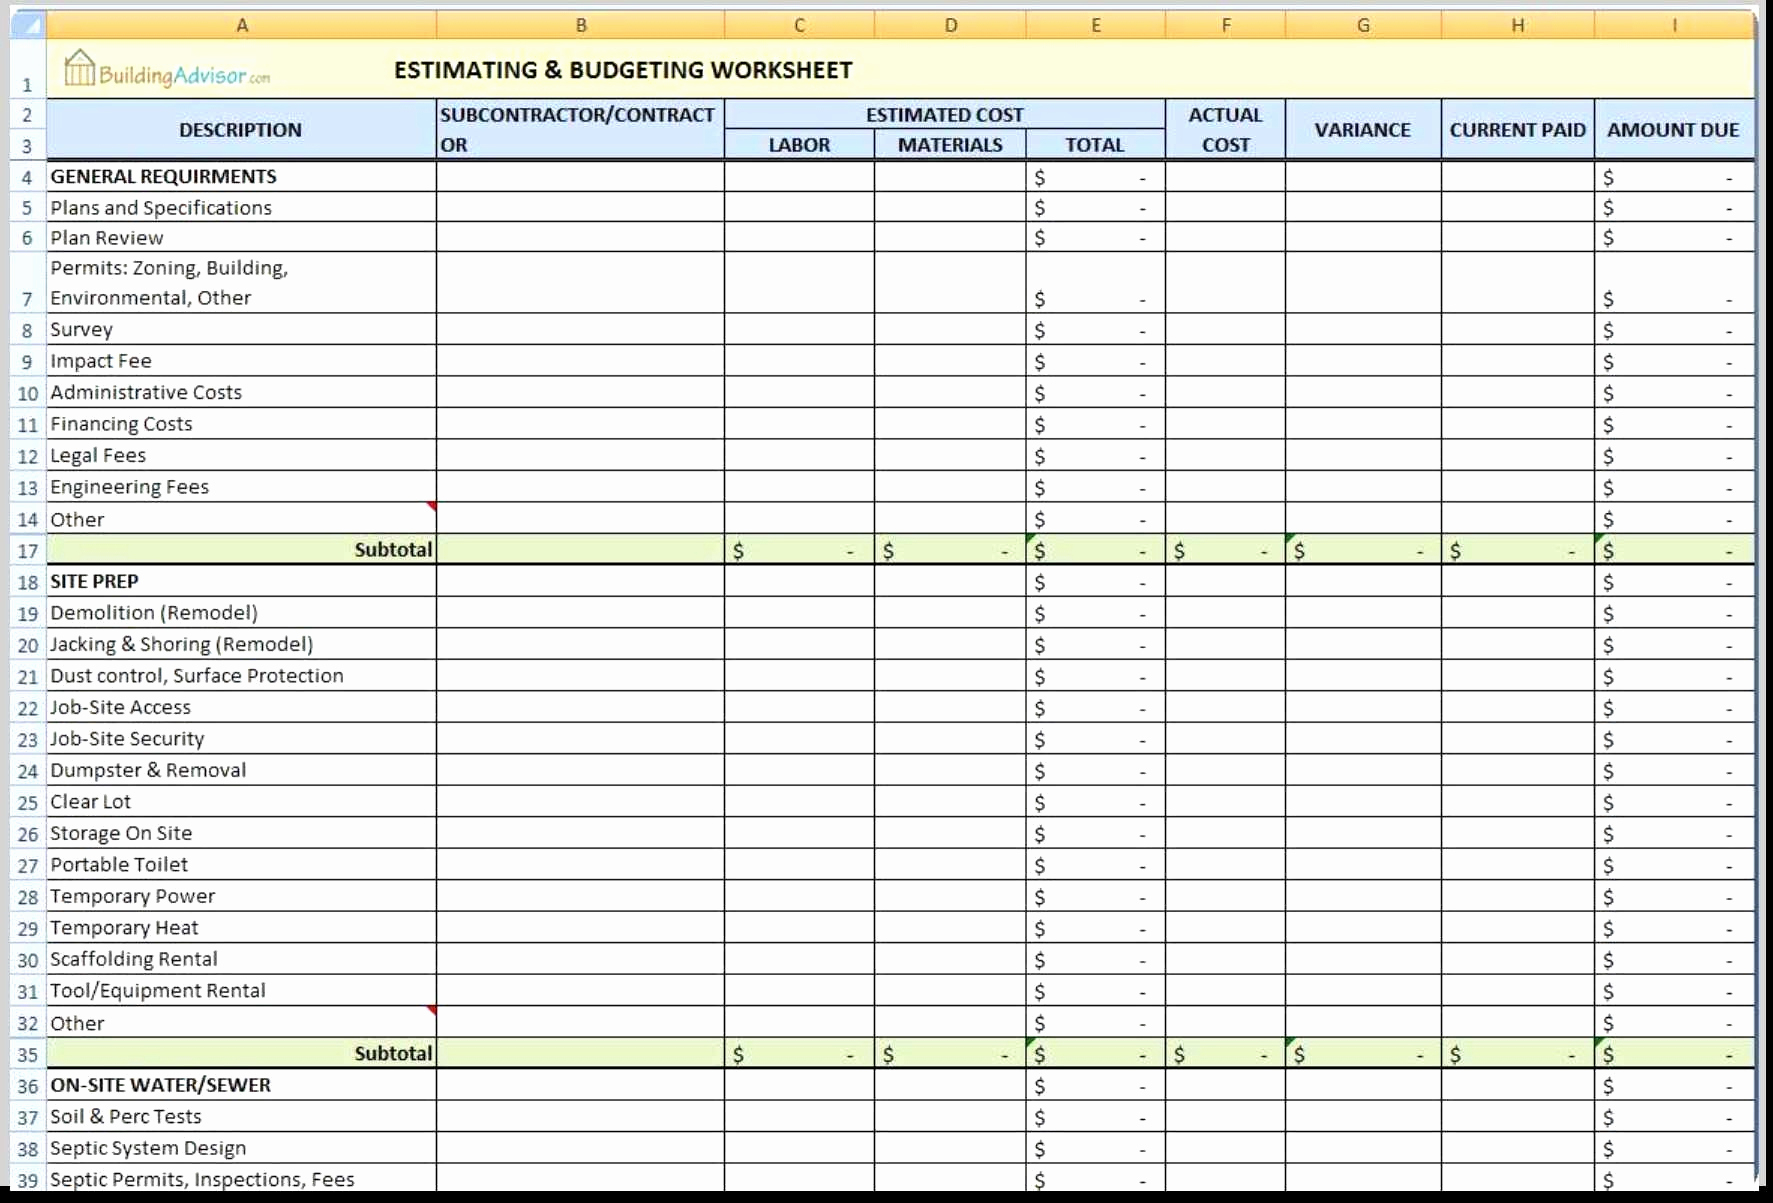 50 New Commercial Construction Cost Estimate Spreadsheet - Document for Cost Estimate Spreadsheet Template